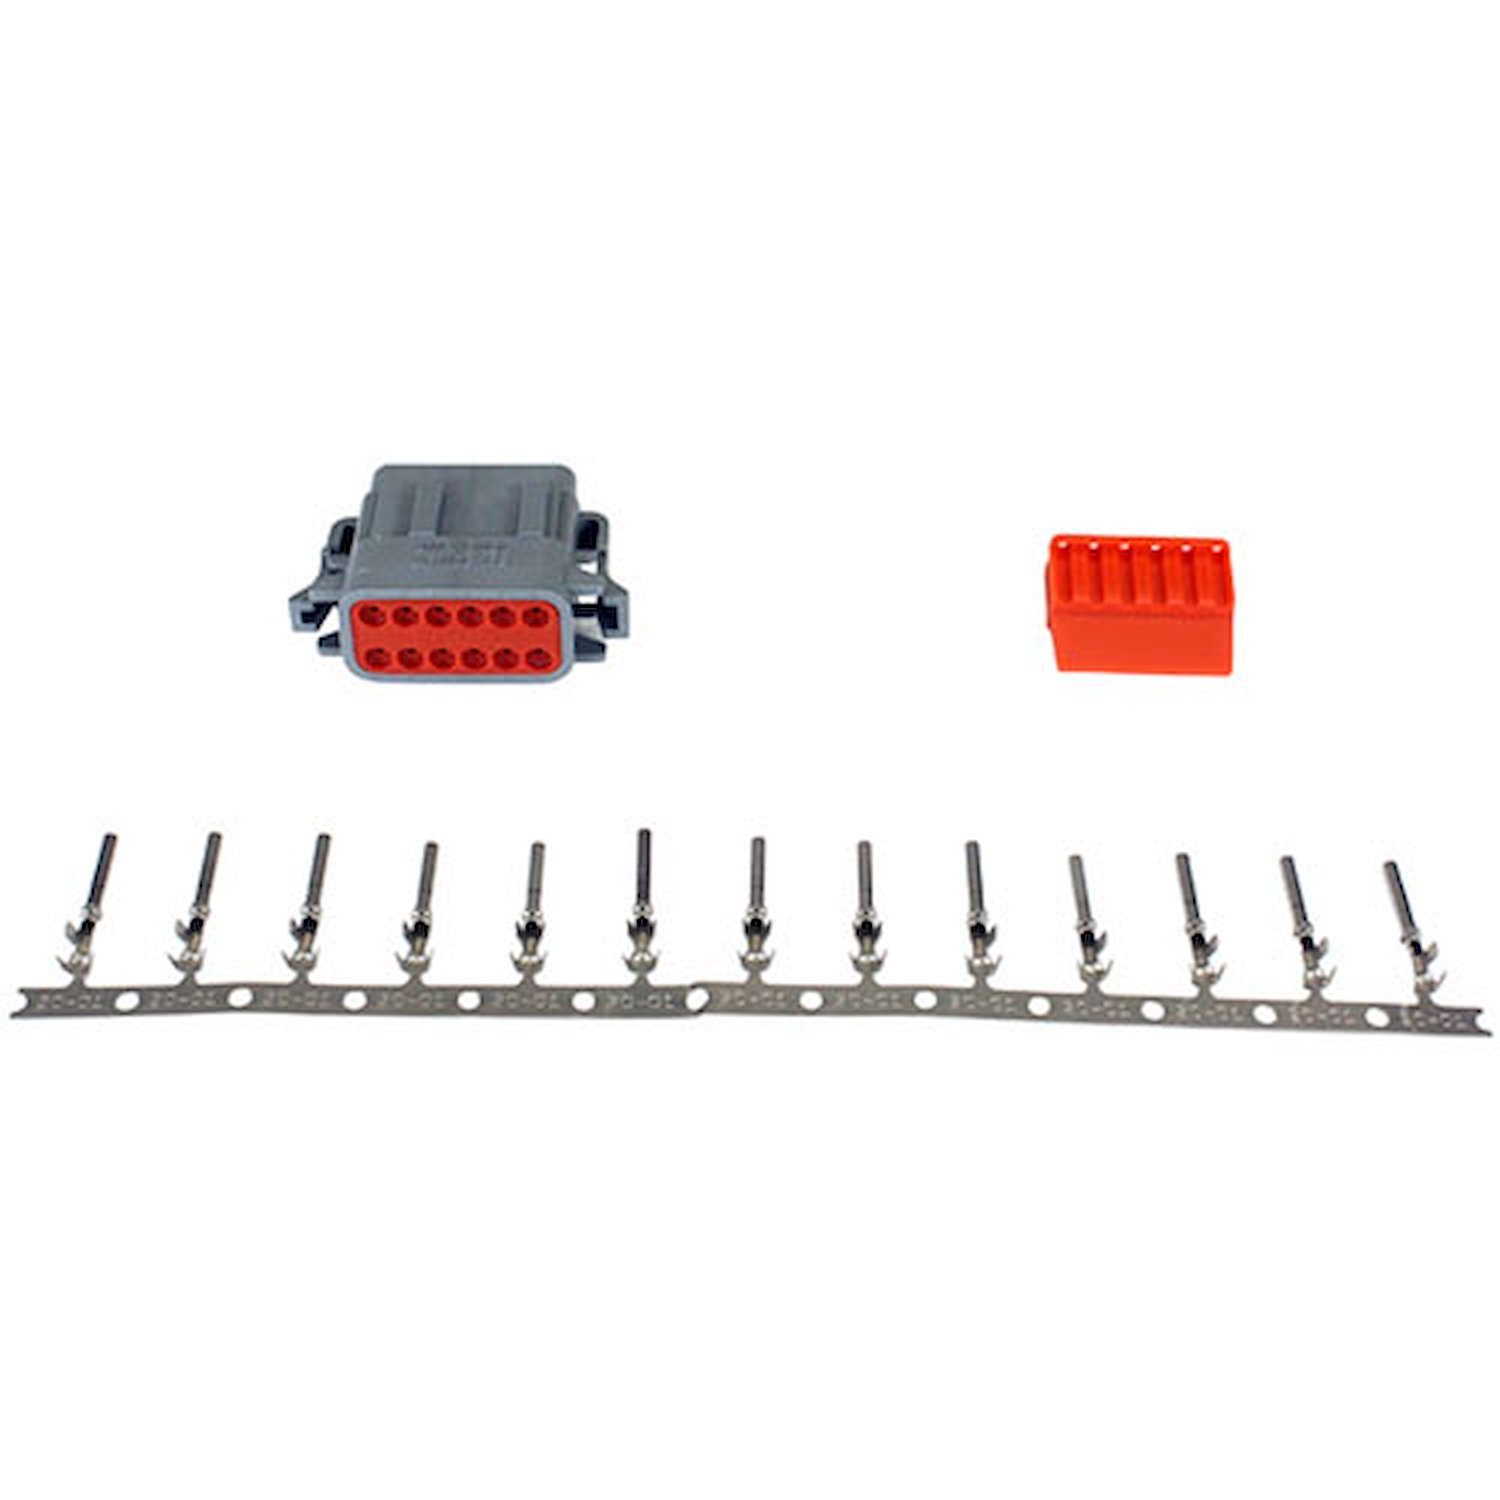 DTM-Style 8-Way Connector Kit Includes Plug, Receptacle, Plug